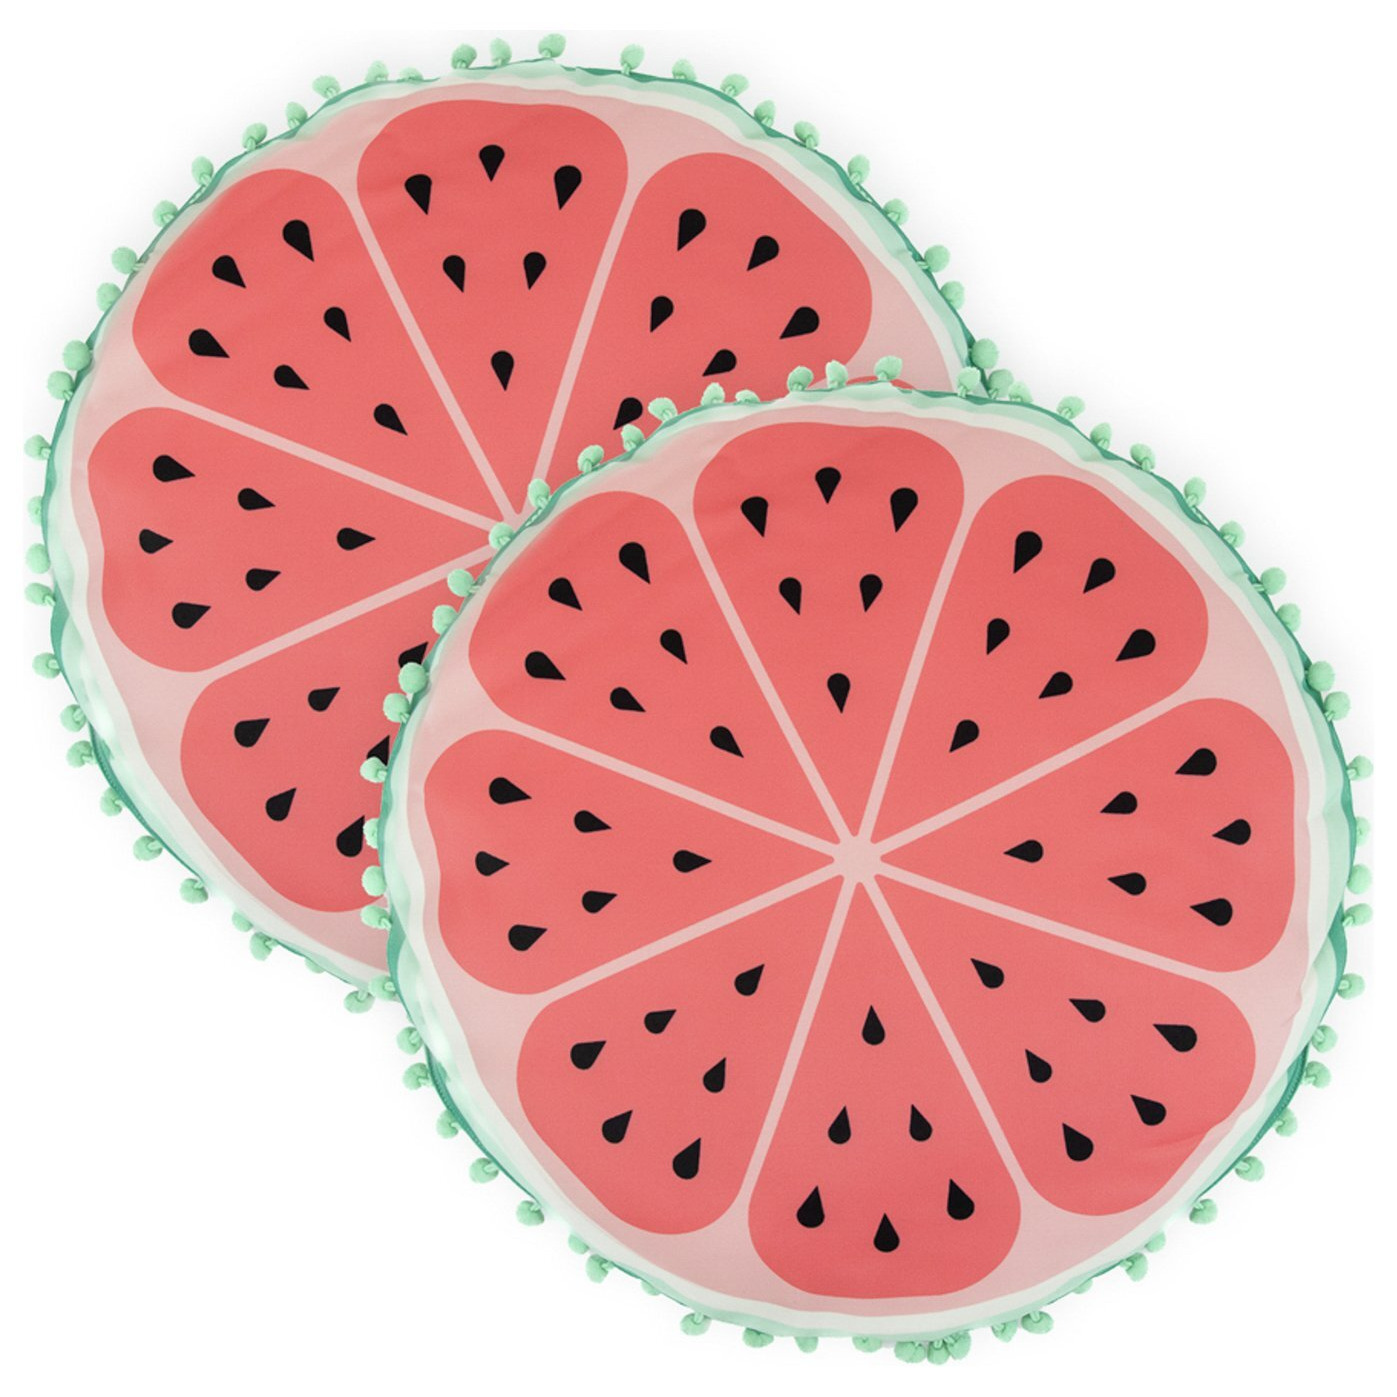 Streetwize Watermelon Outdoor Cushions - Pack of 4 - image 1